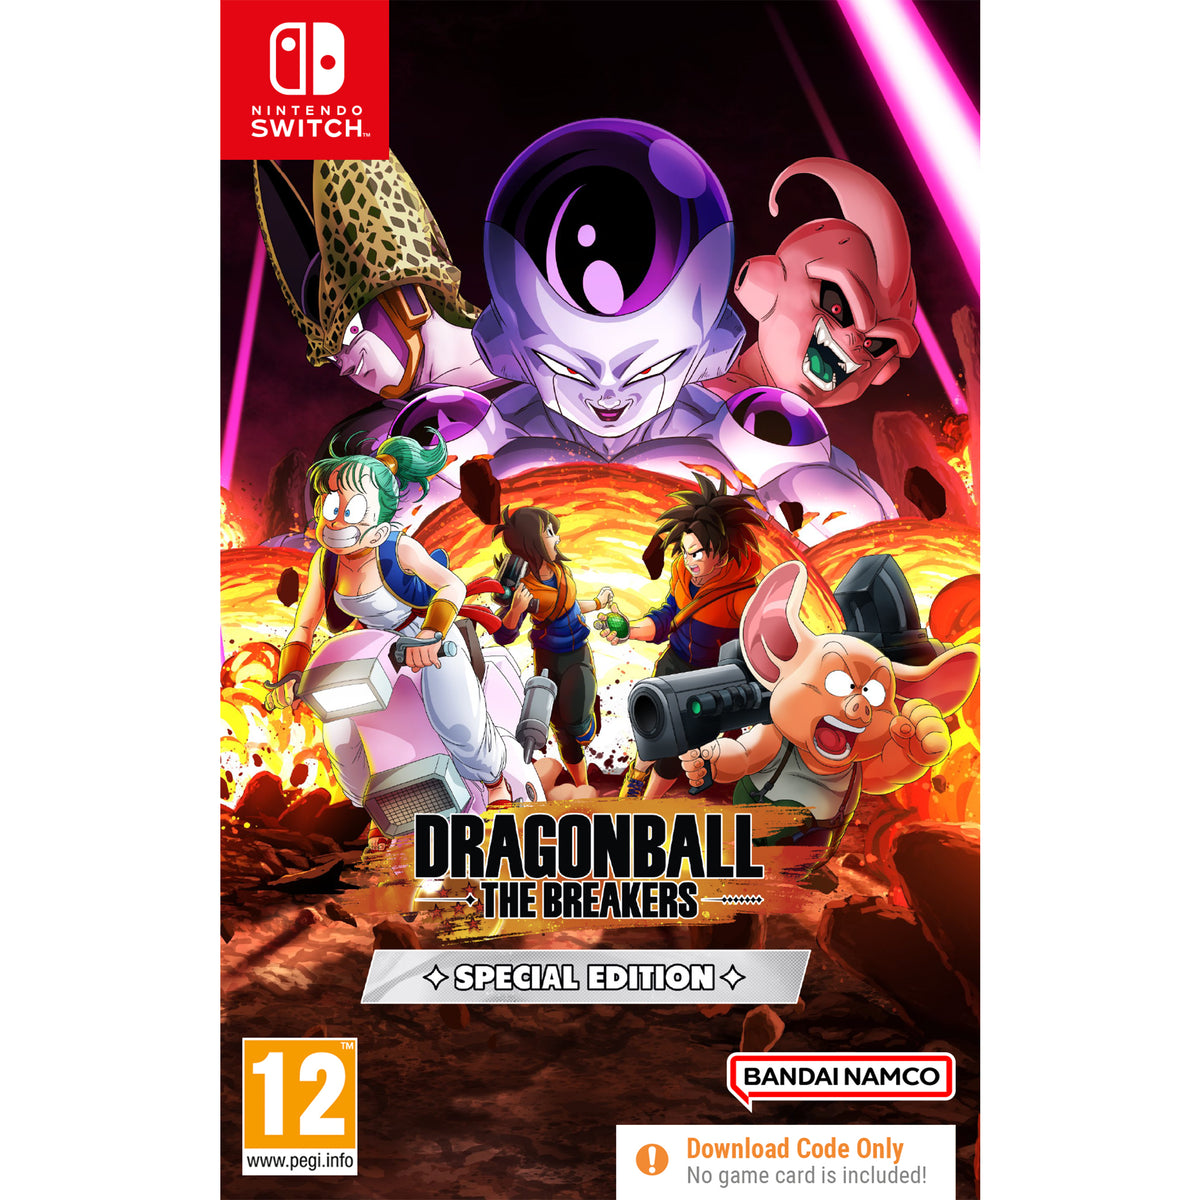 Dragon Ball: The Breakers Limited Edition Preorders Now Open